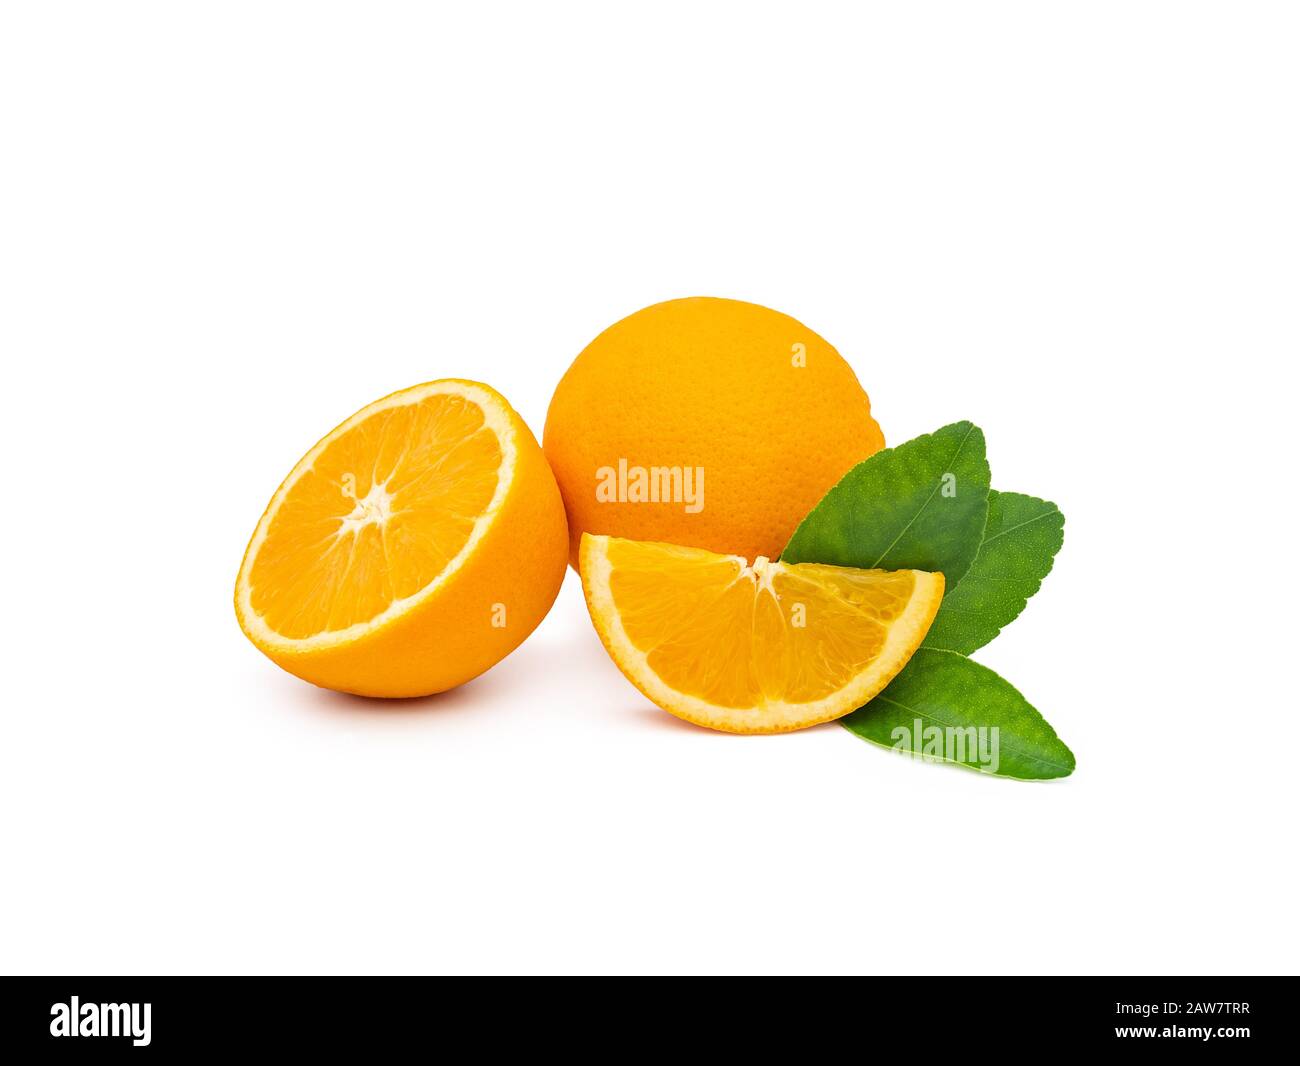 a group of fresh orange fruits with green leaves, isolated on white background with clipping path. fruit product display or montage, studio shot Stock Photo